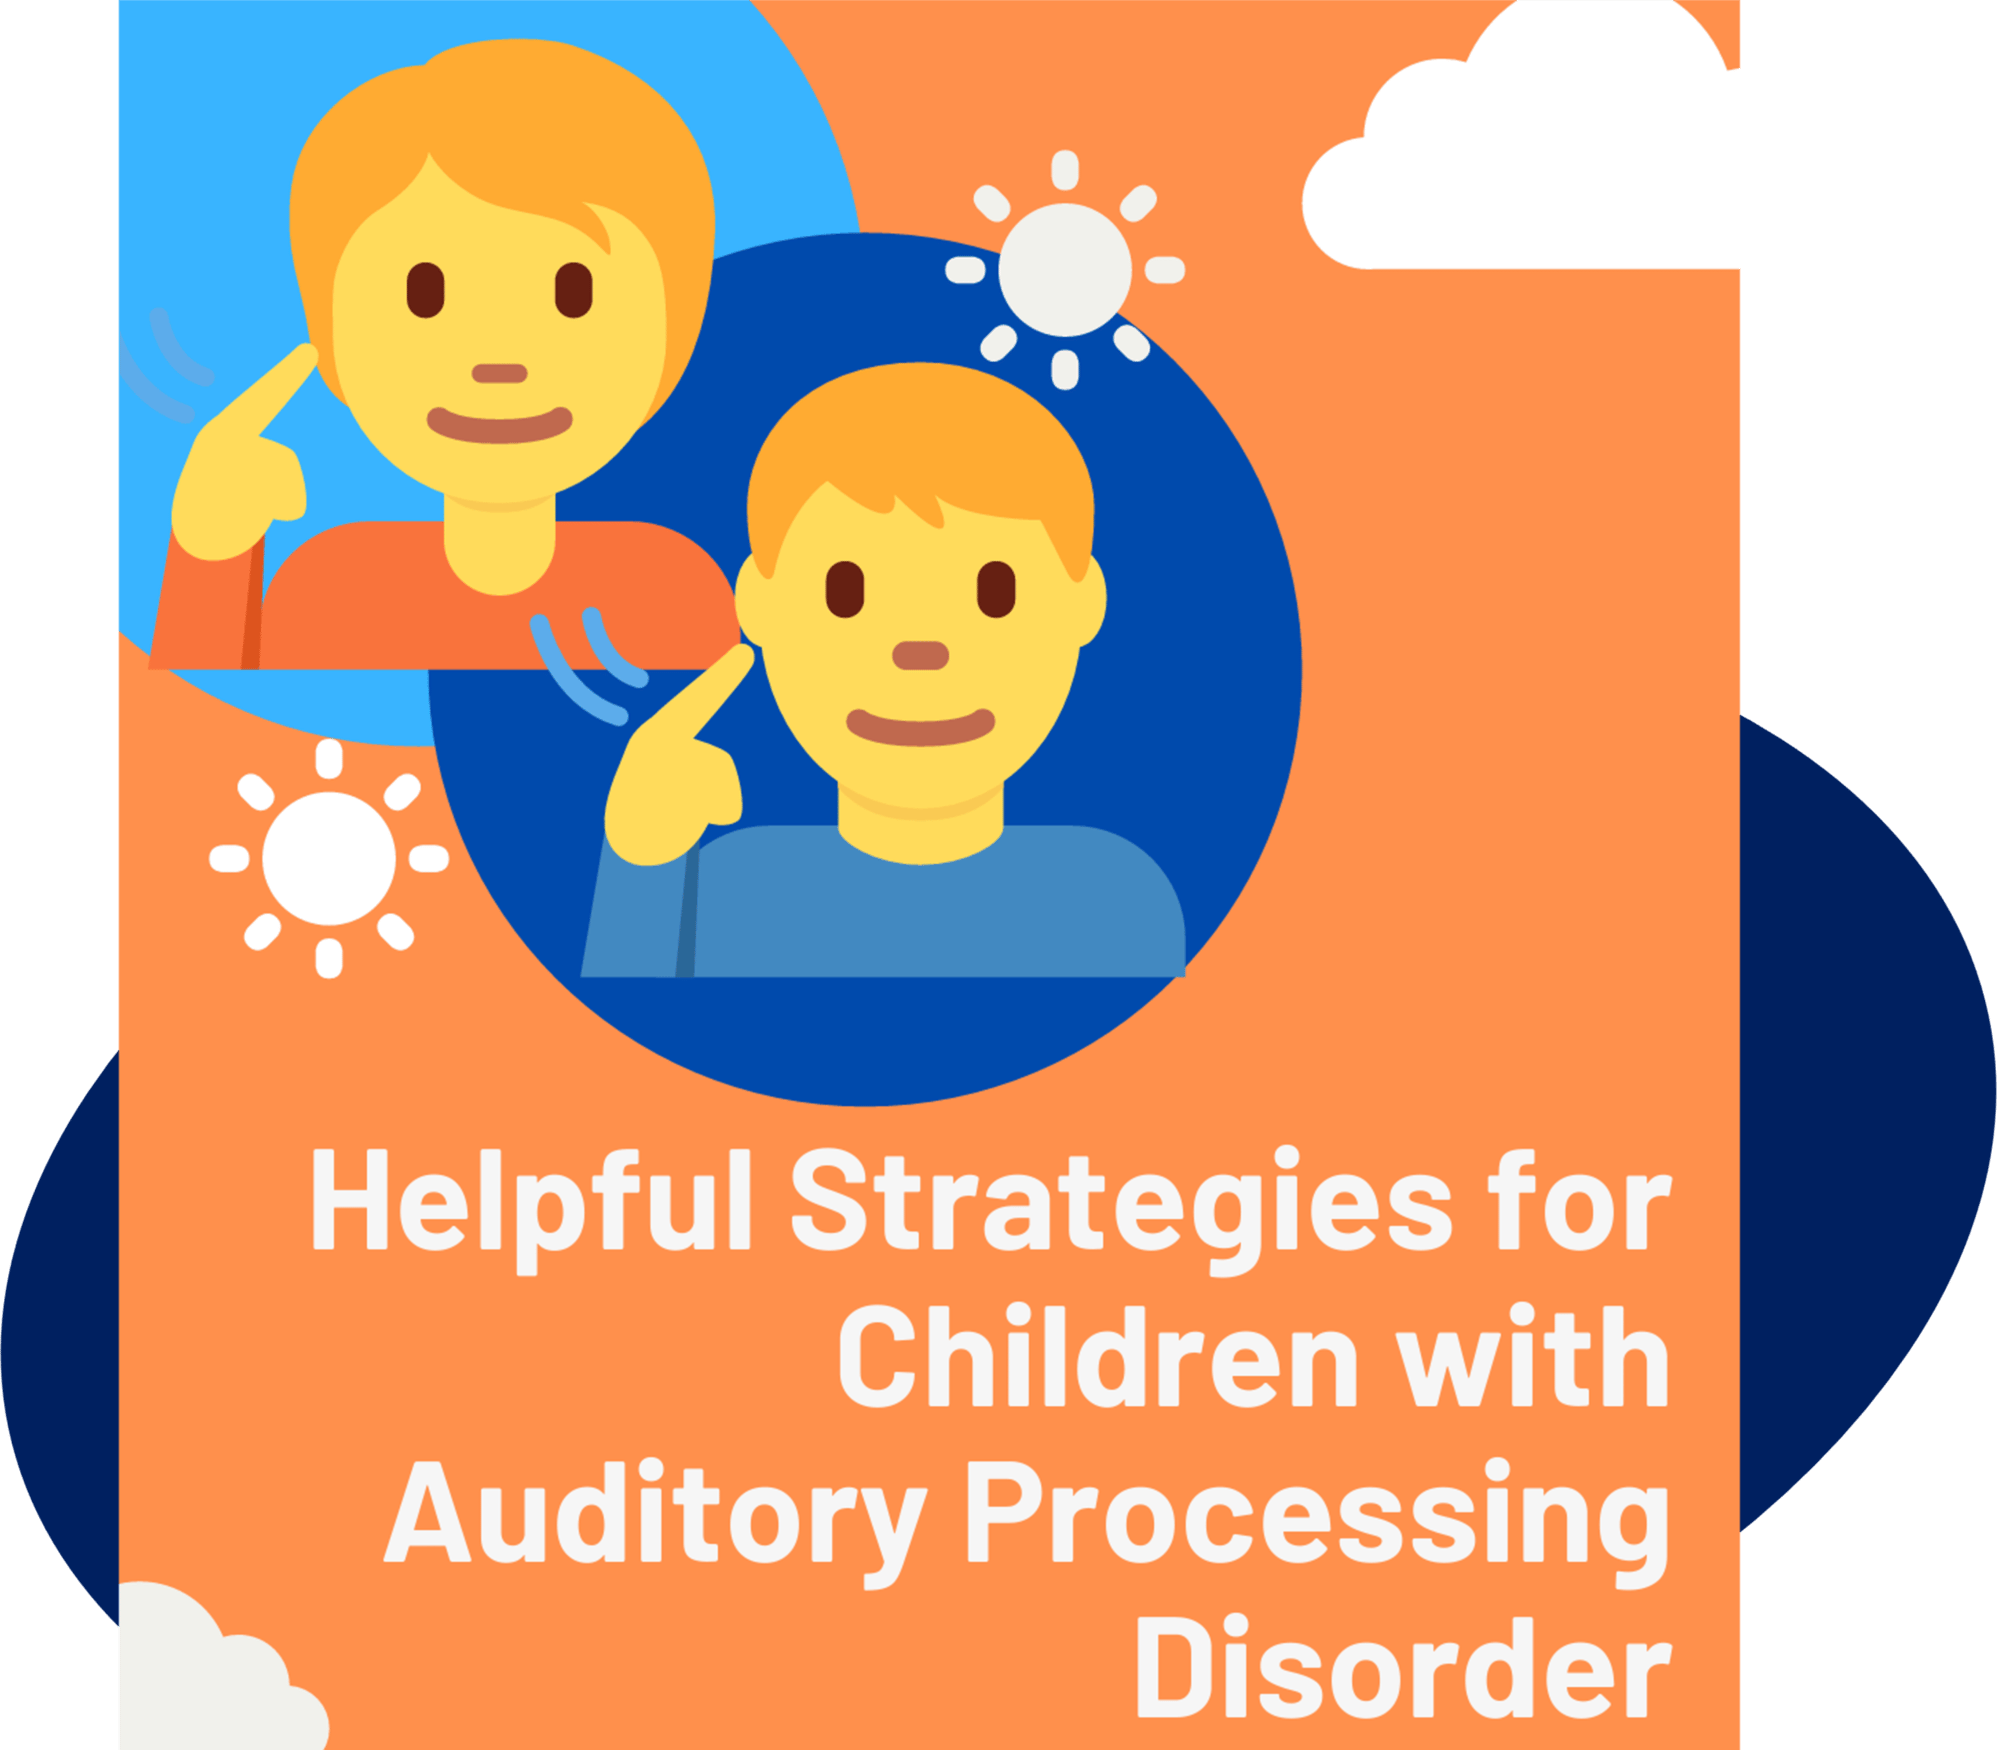 Helpful Strategies for children with APD